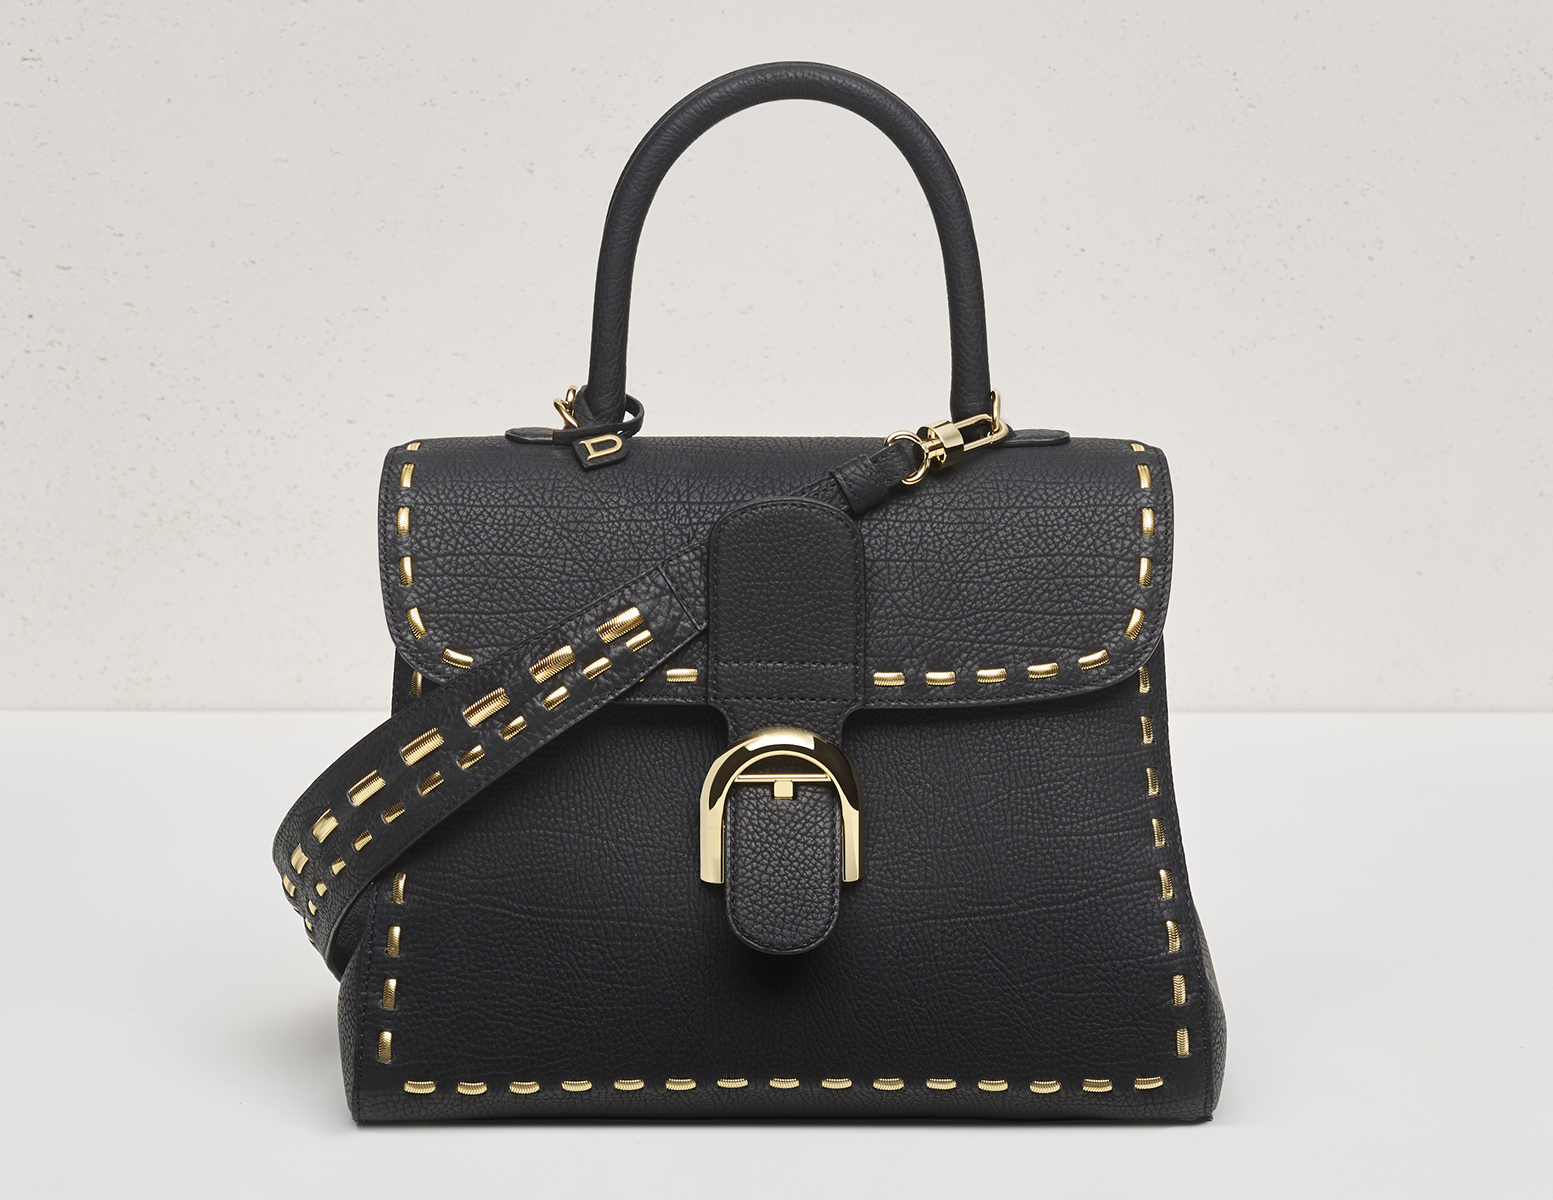 Delvaux handbag review  Does the worlds 1st luxury leather goods brand  live up to their name